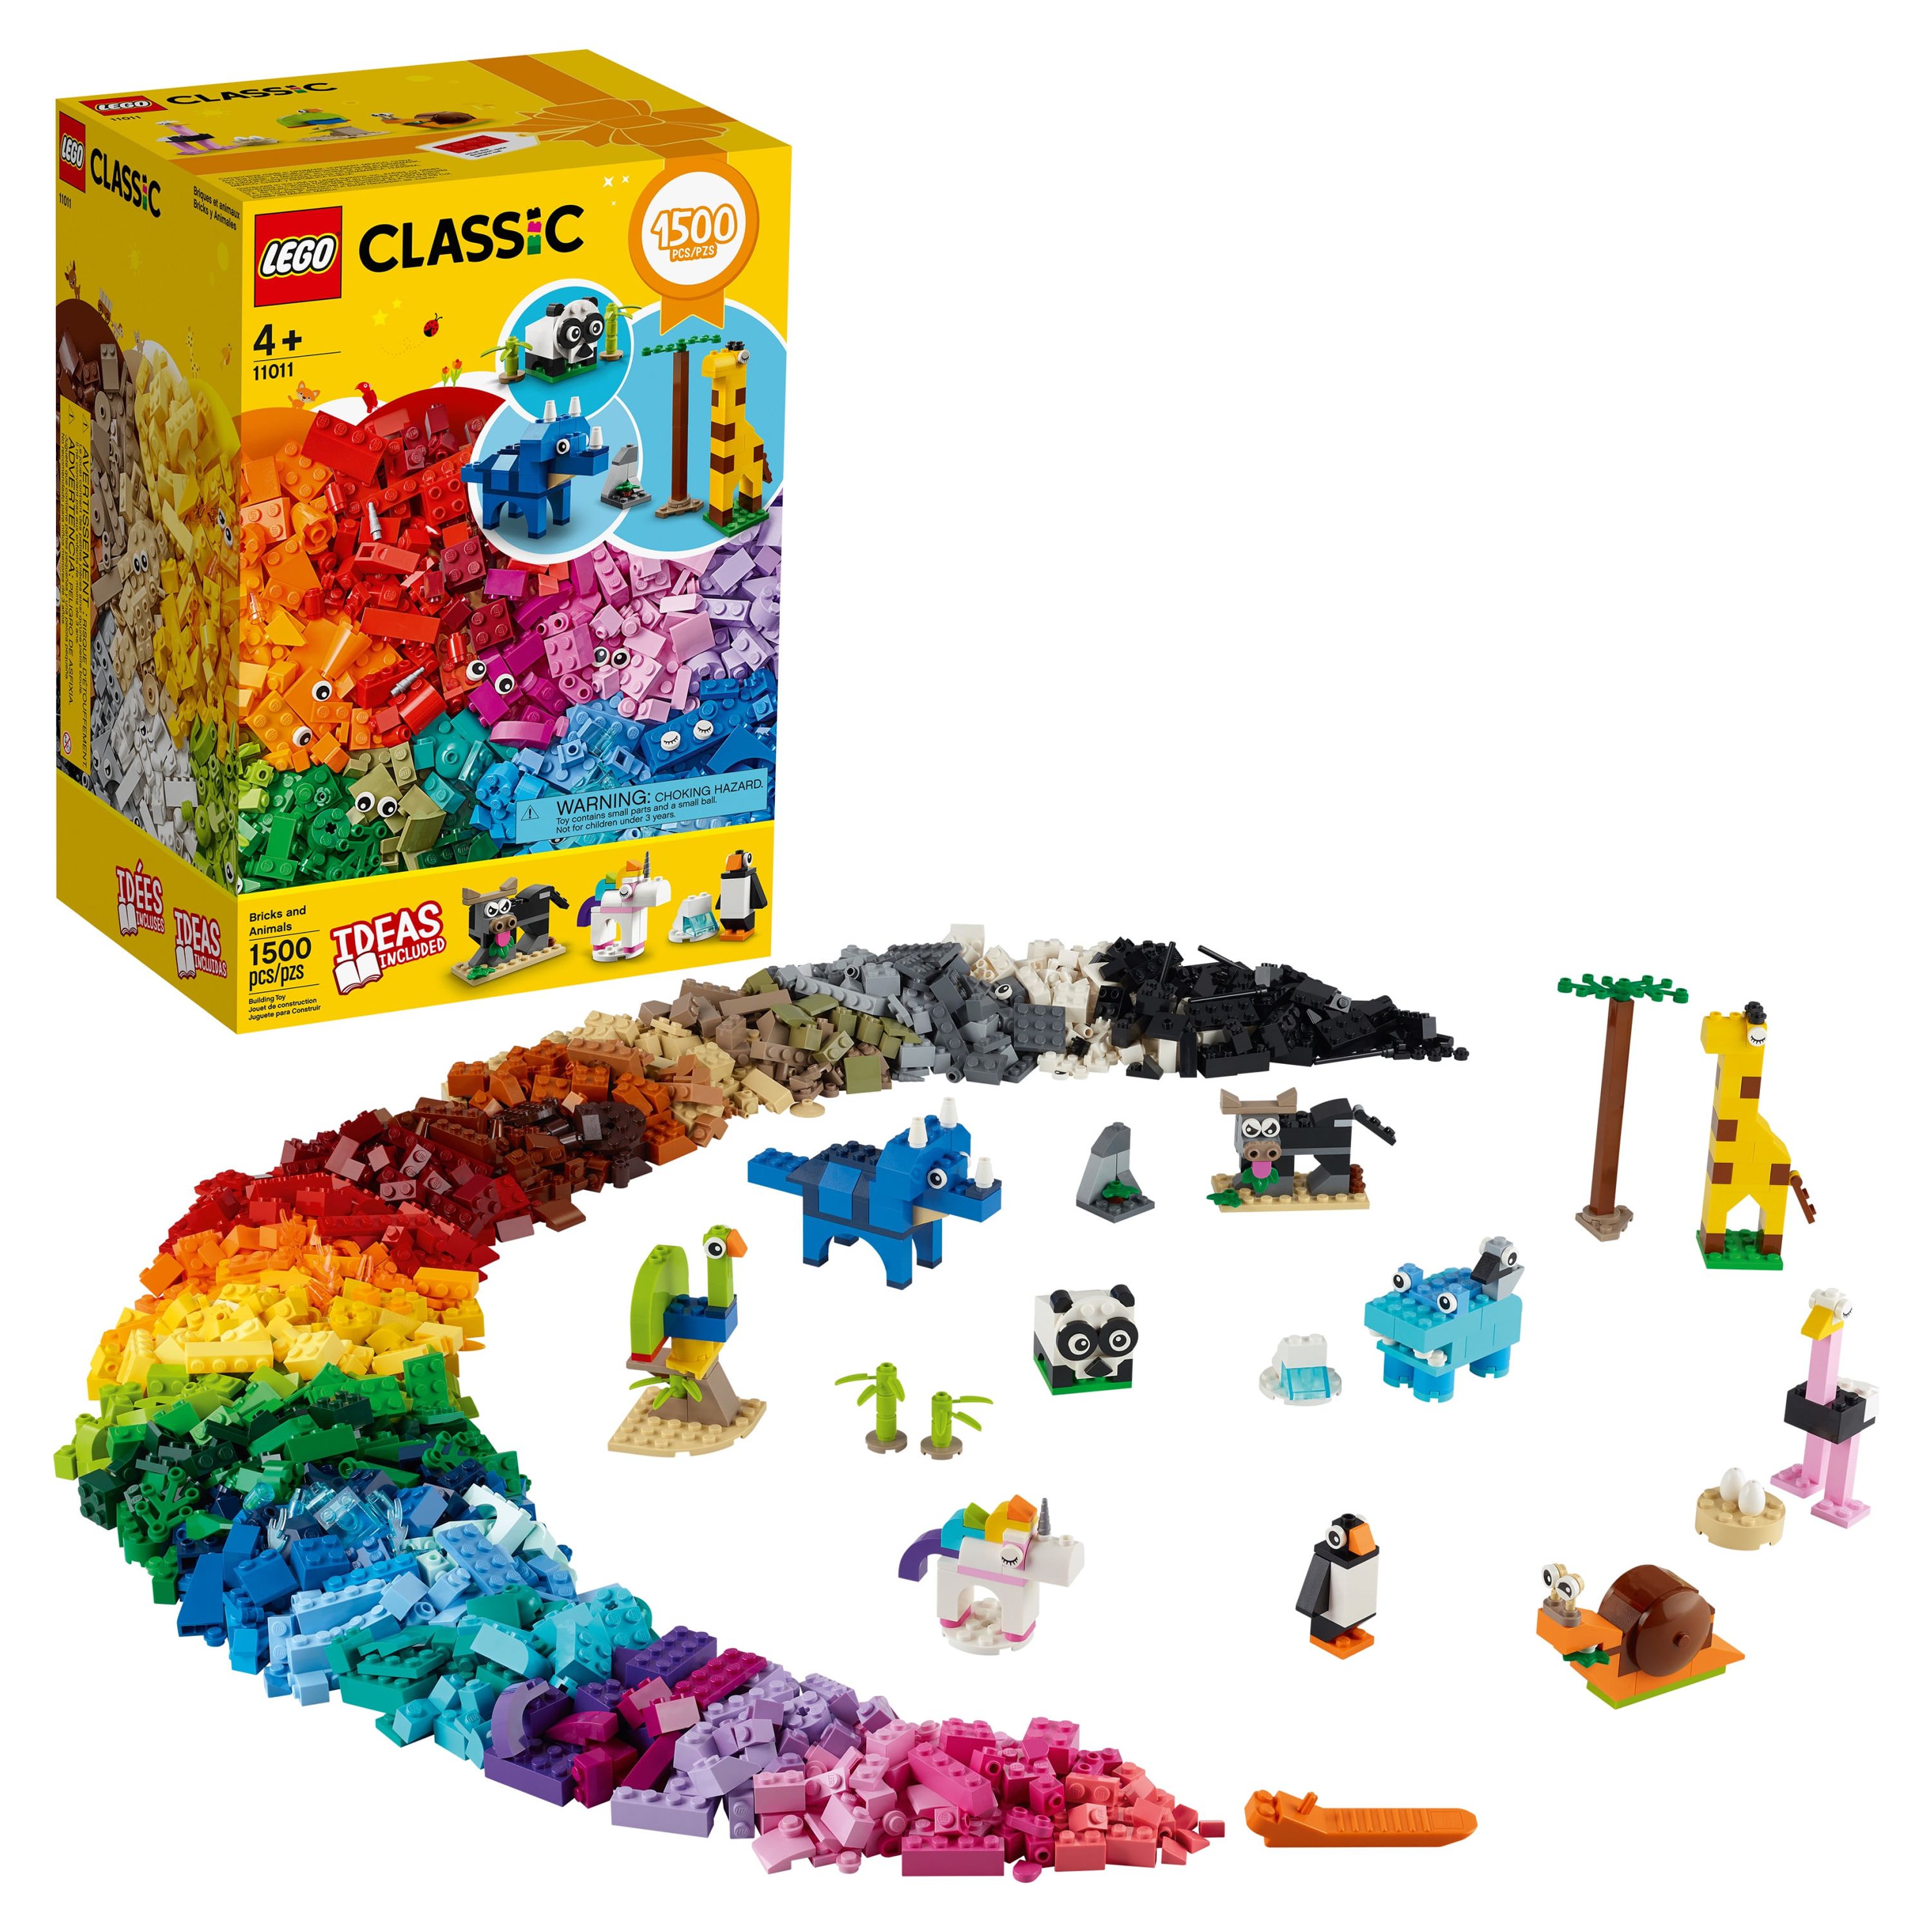 LEGO Classic Bricks and Animals 11011 Creative Toy That Builds into 10 Amazing Animal Figures (1,500 Pieces) - image 1 of 6